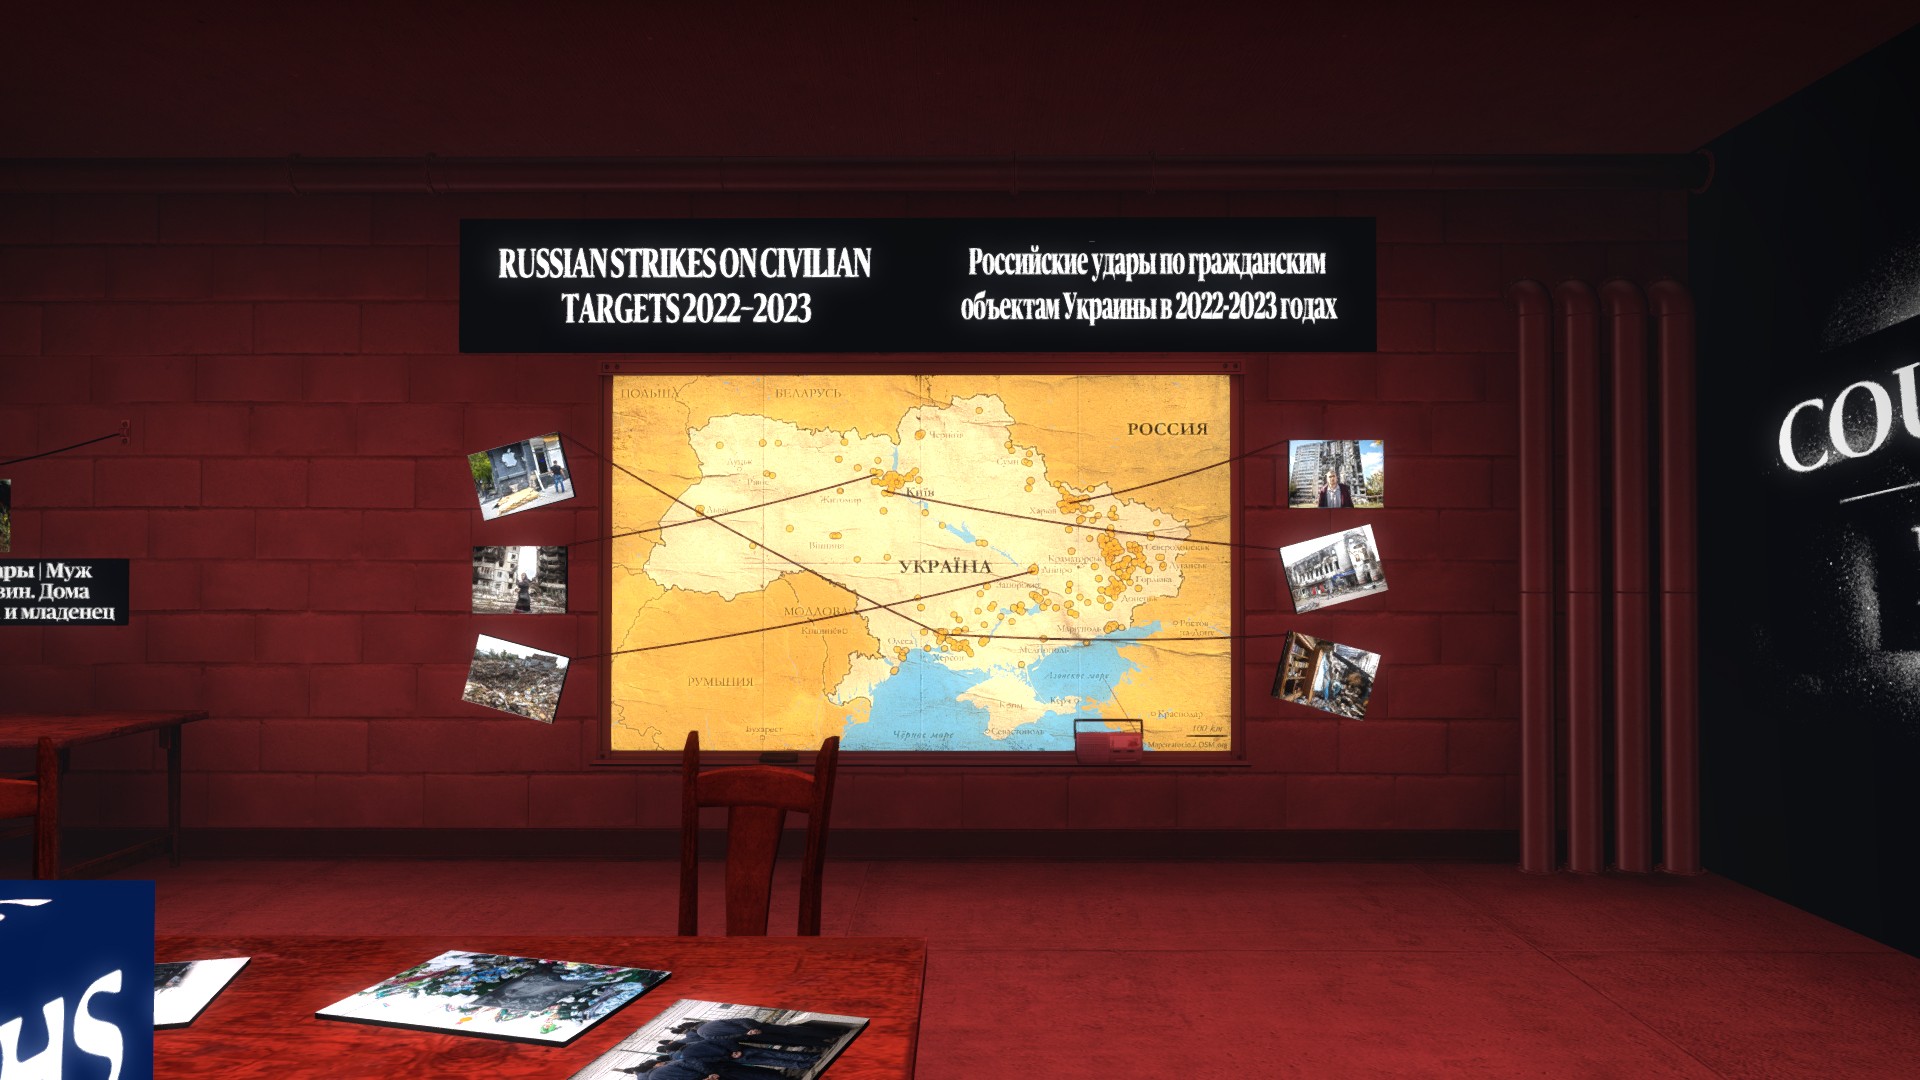 CSGO map has a secret room, full of news stories banned by Russia: A CSGO map used to share information about the Russian invasion of Ukraine